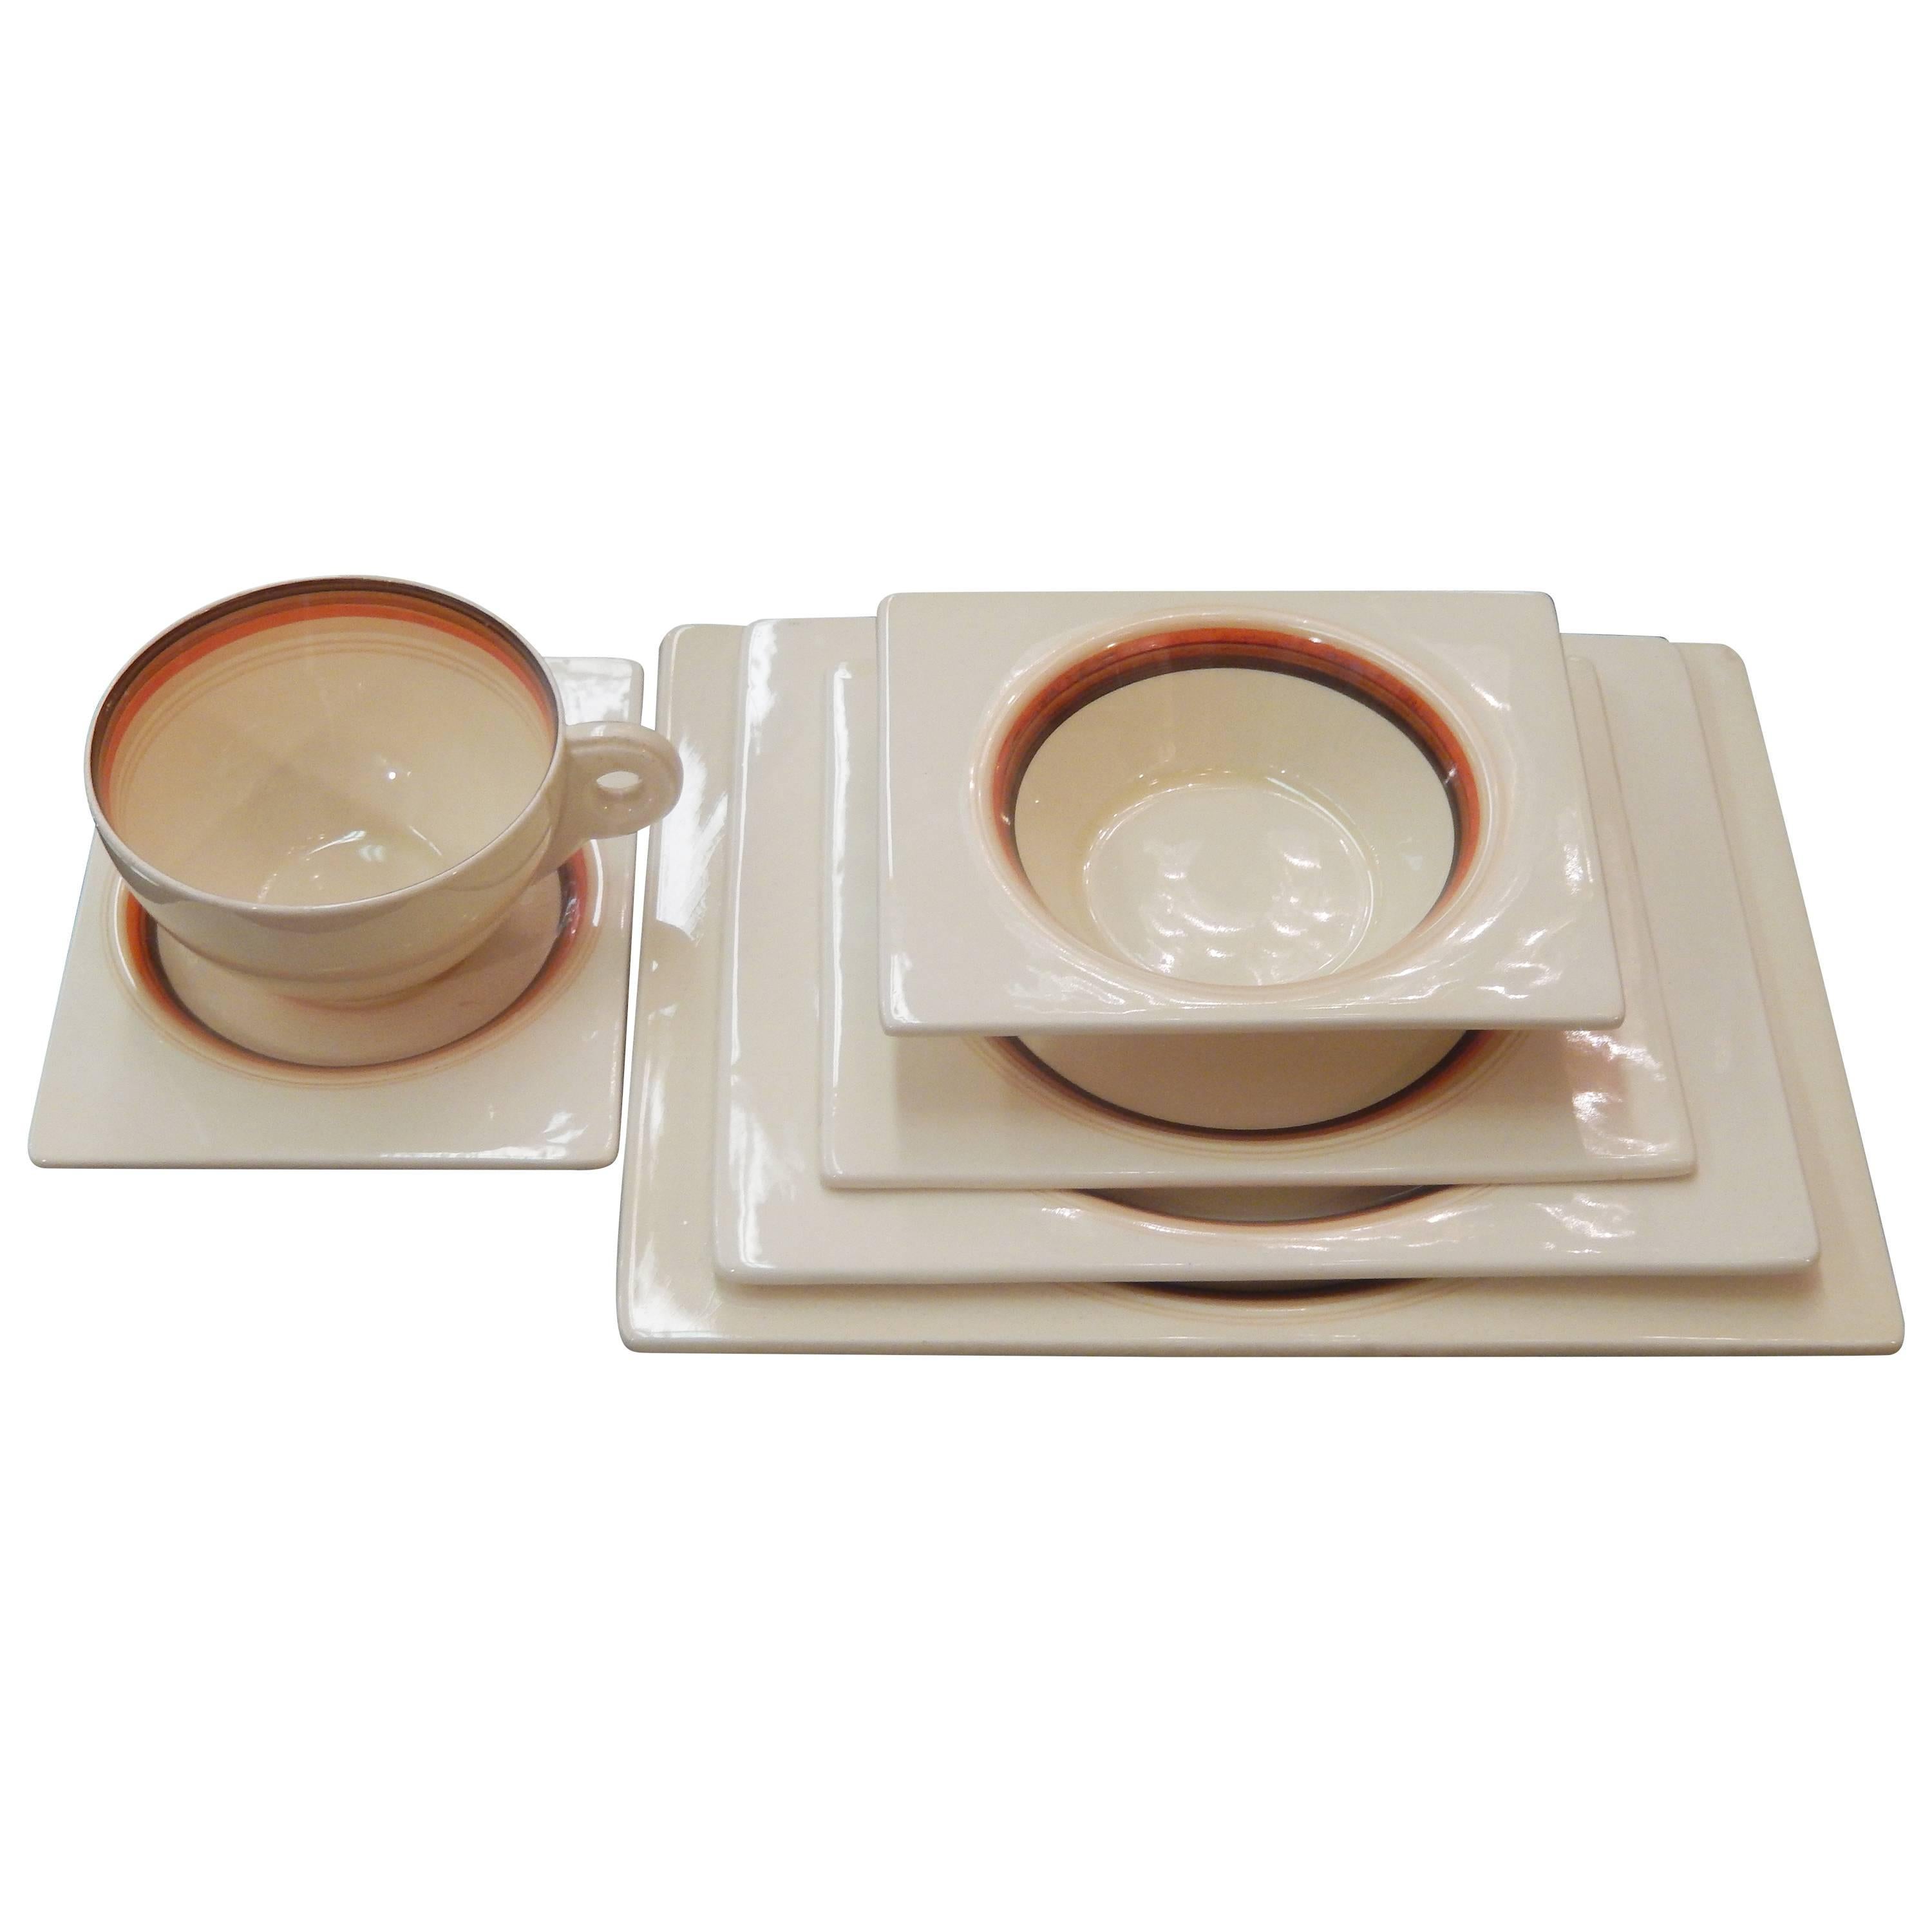 Clarice Cliff Biarritz for Royal Staffordshire 60-Piece China Set For Sale